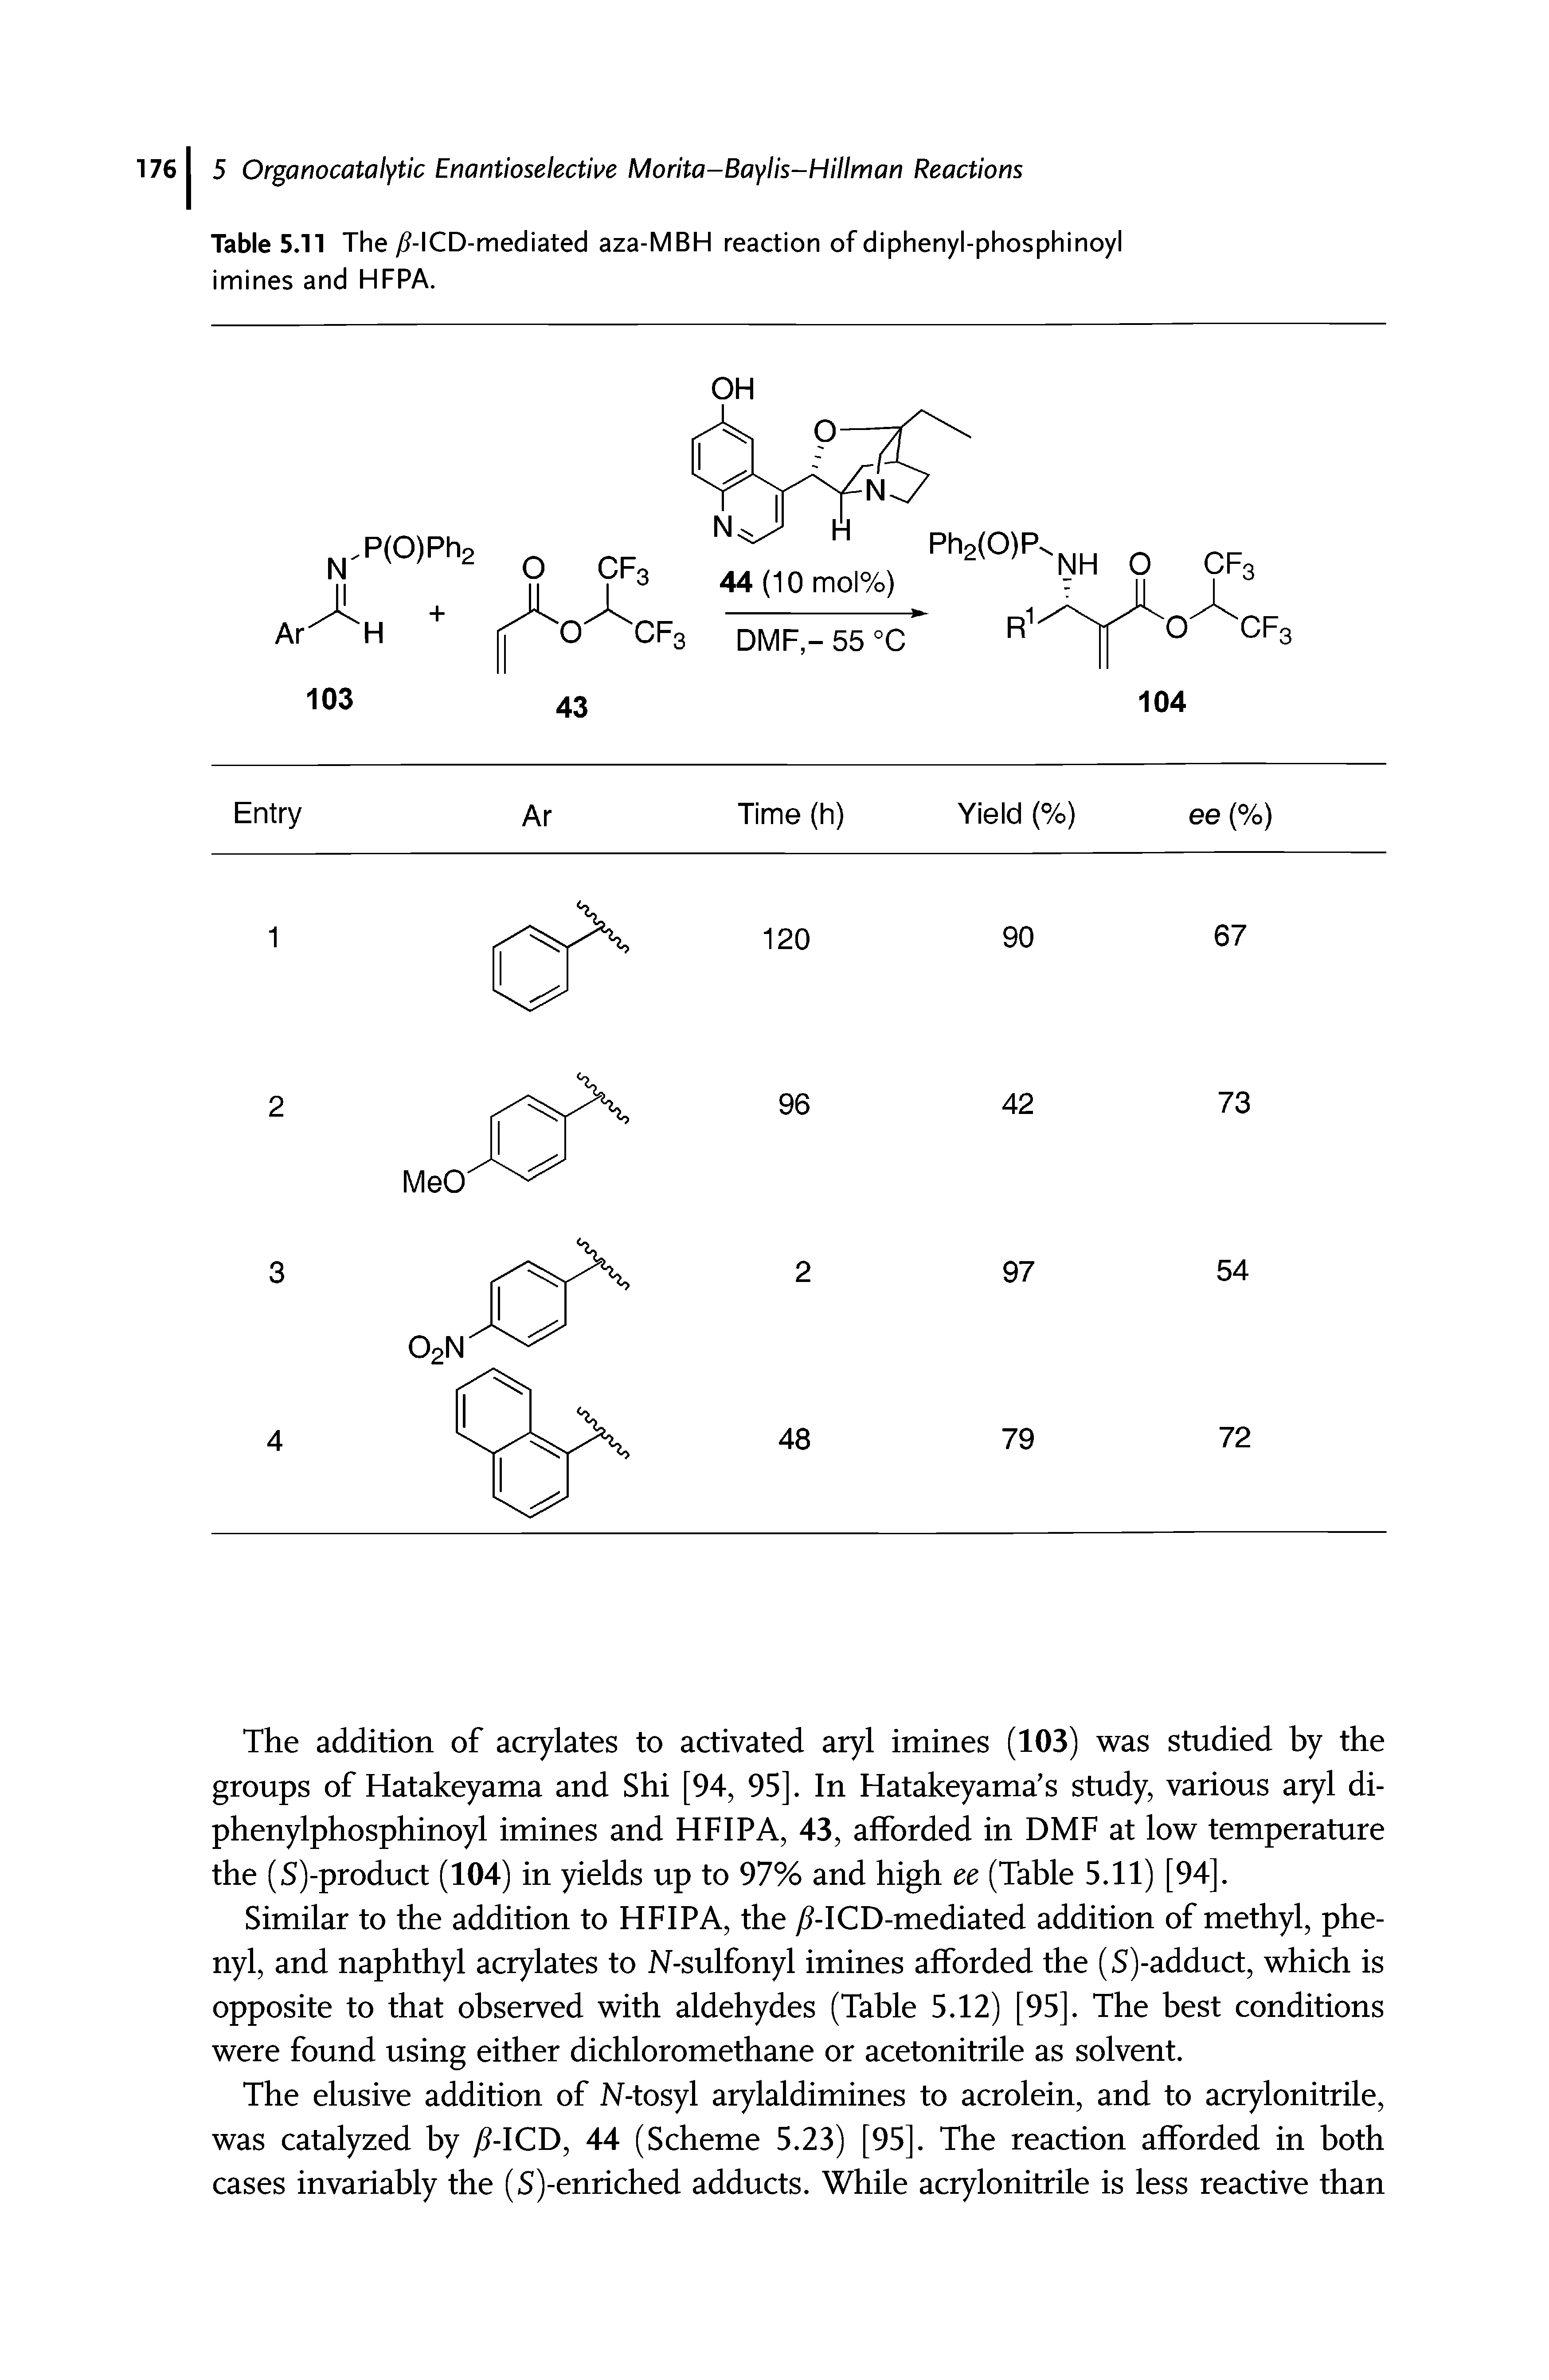 Table 5.11 The /MCD-mediated aza-MBH reaction of diphenyl-phosphinoyl imines and HFPA.